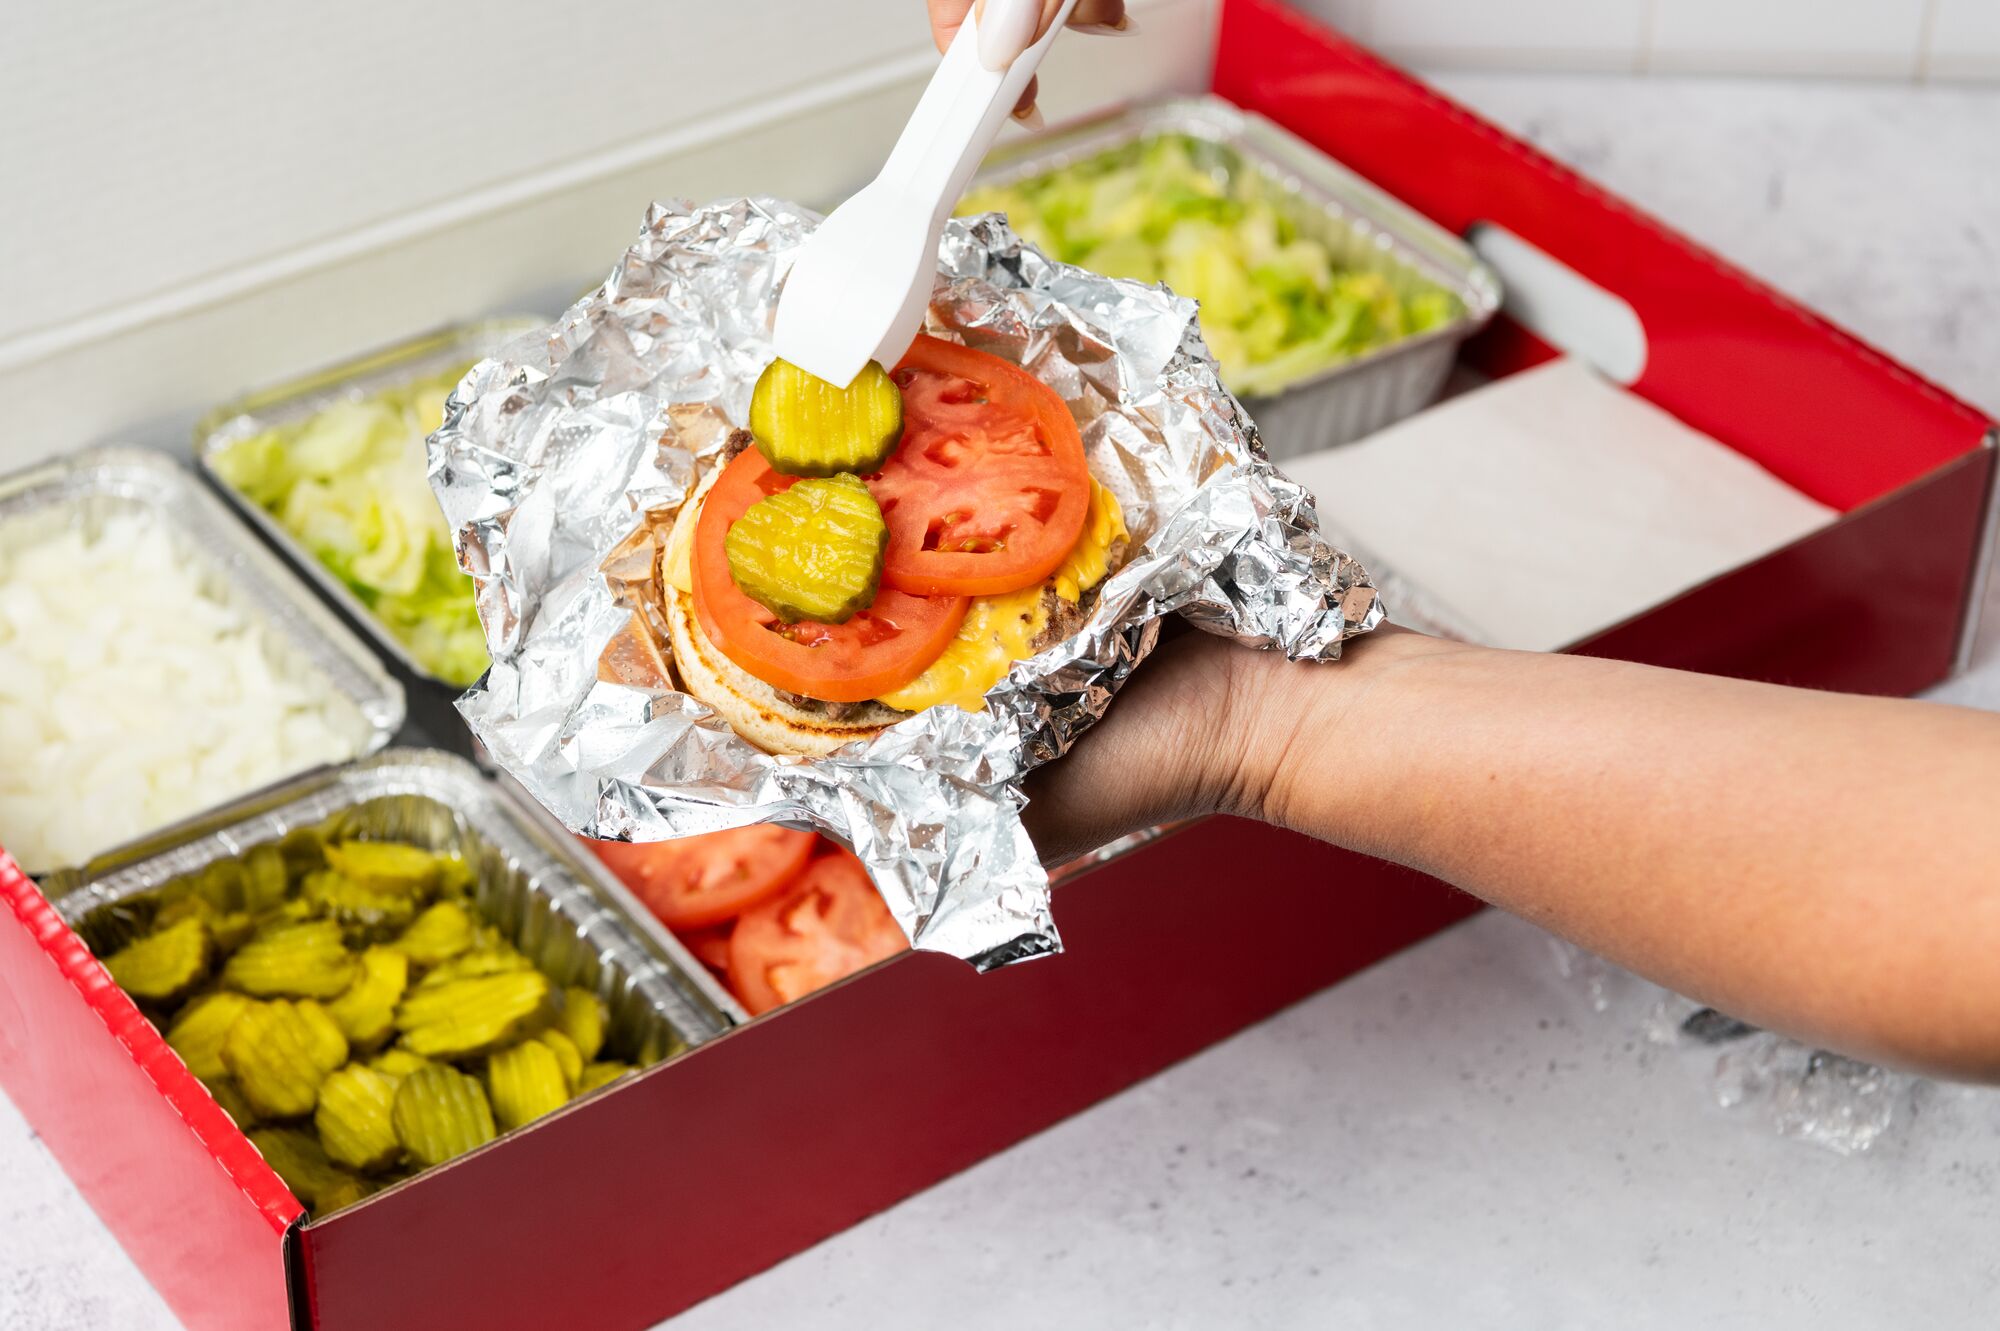 A close-up photo of a person putting pickles on their cheeseburger in front of a Five Guys catering  Five Guys Ottawa (613)562-8119